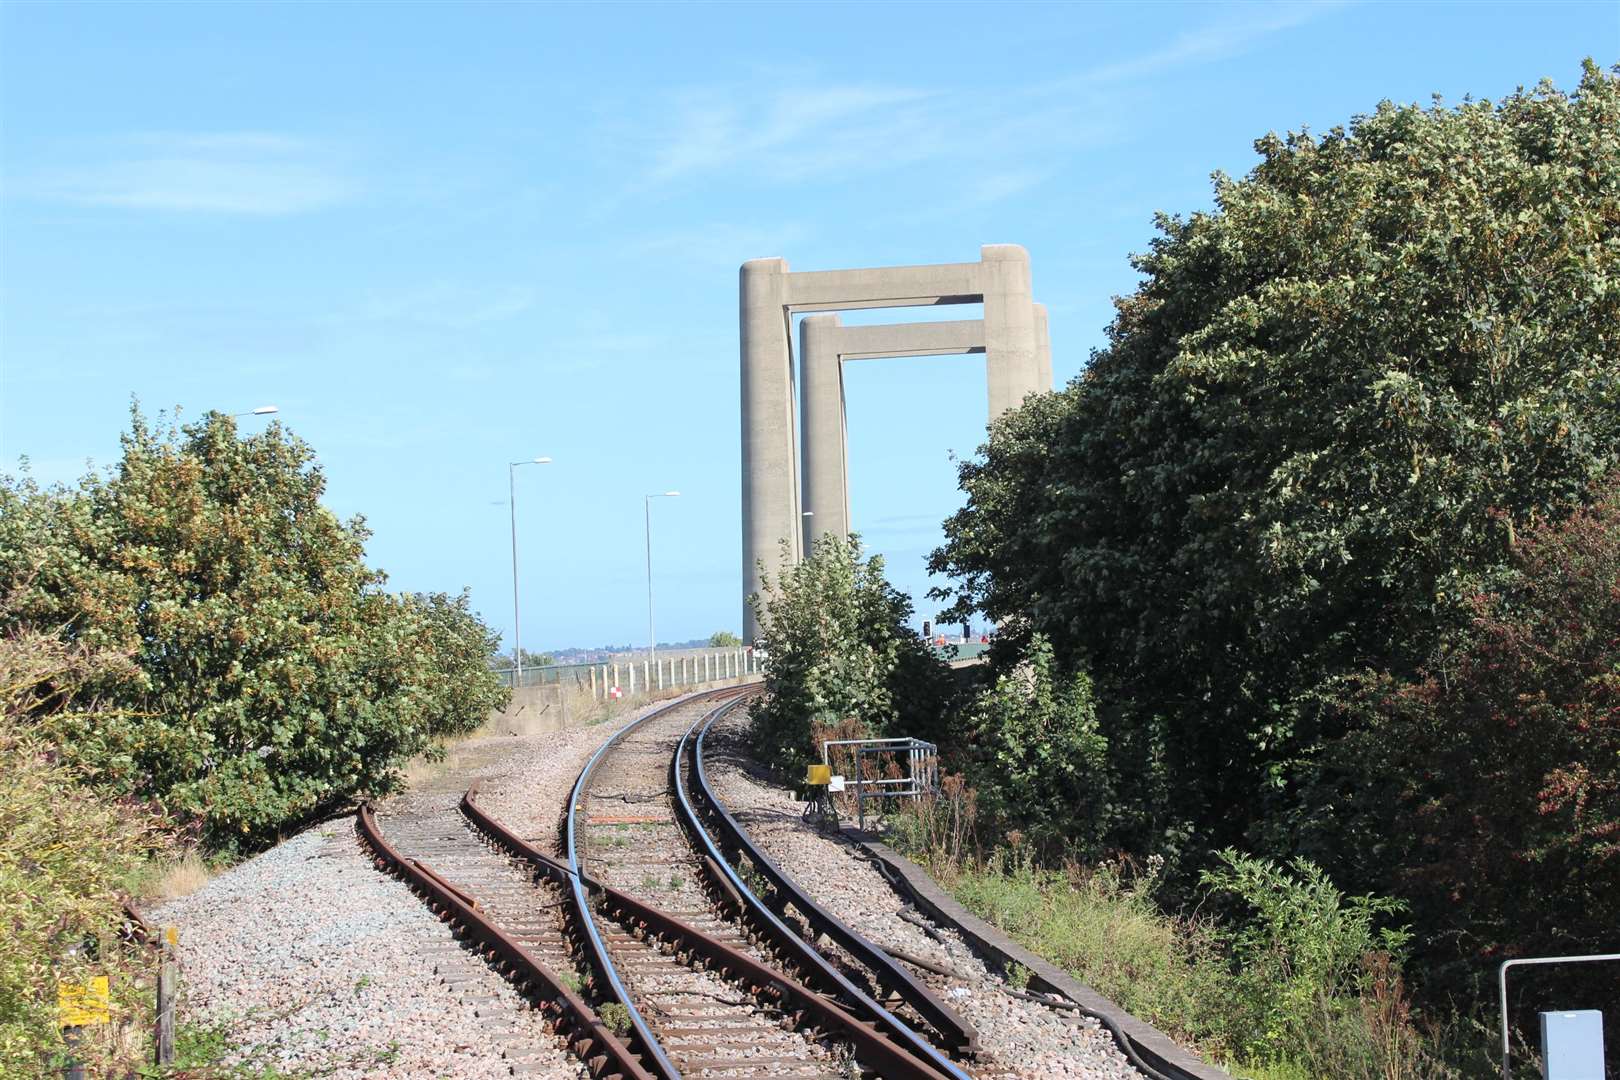 Hot weather could affect train tracks - especially at the Kingsferry Bridge, Sheppey (2714299)